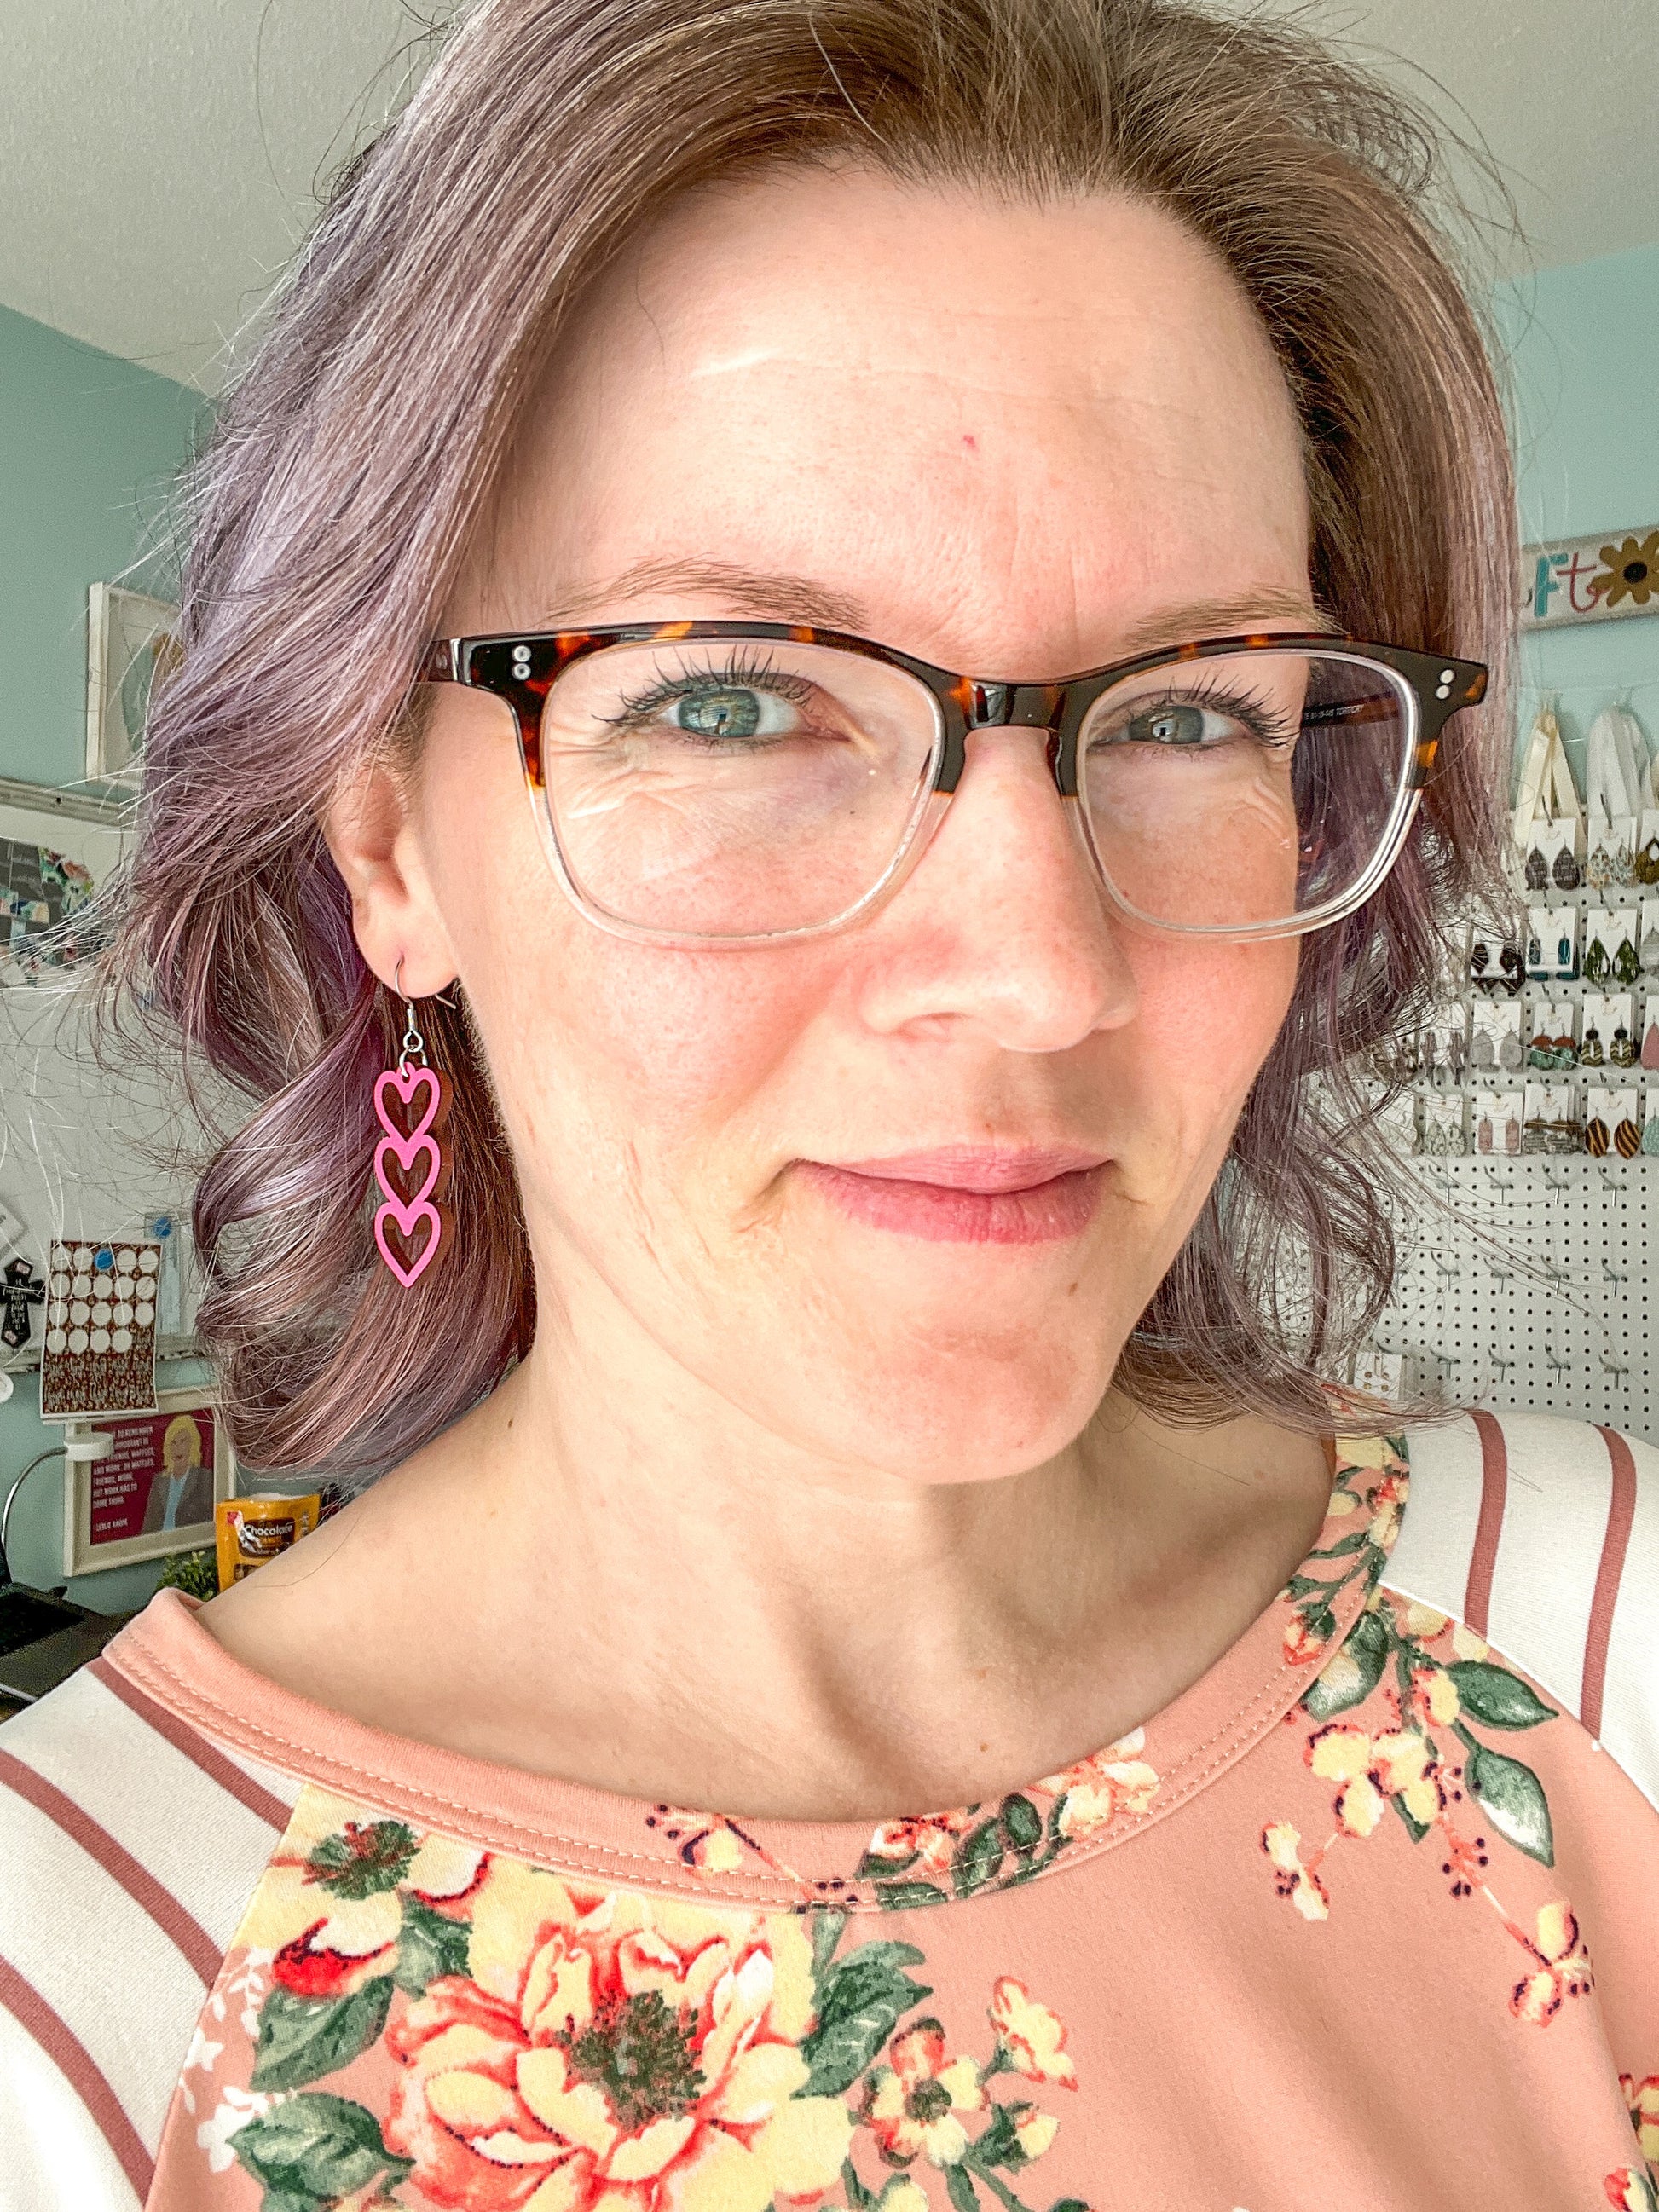 Bright Pink Stacked Heart Wood Earrings: Choose From 3 Designs